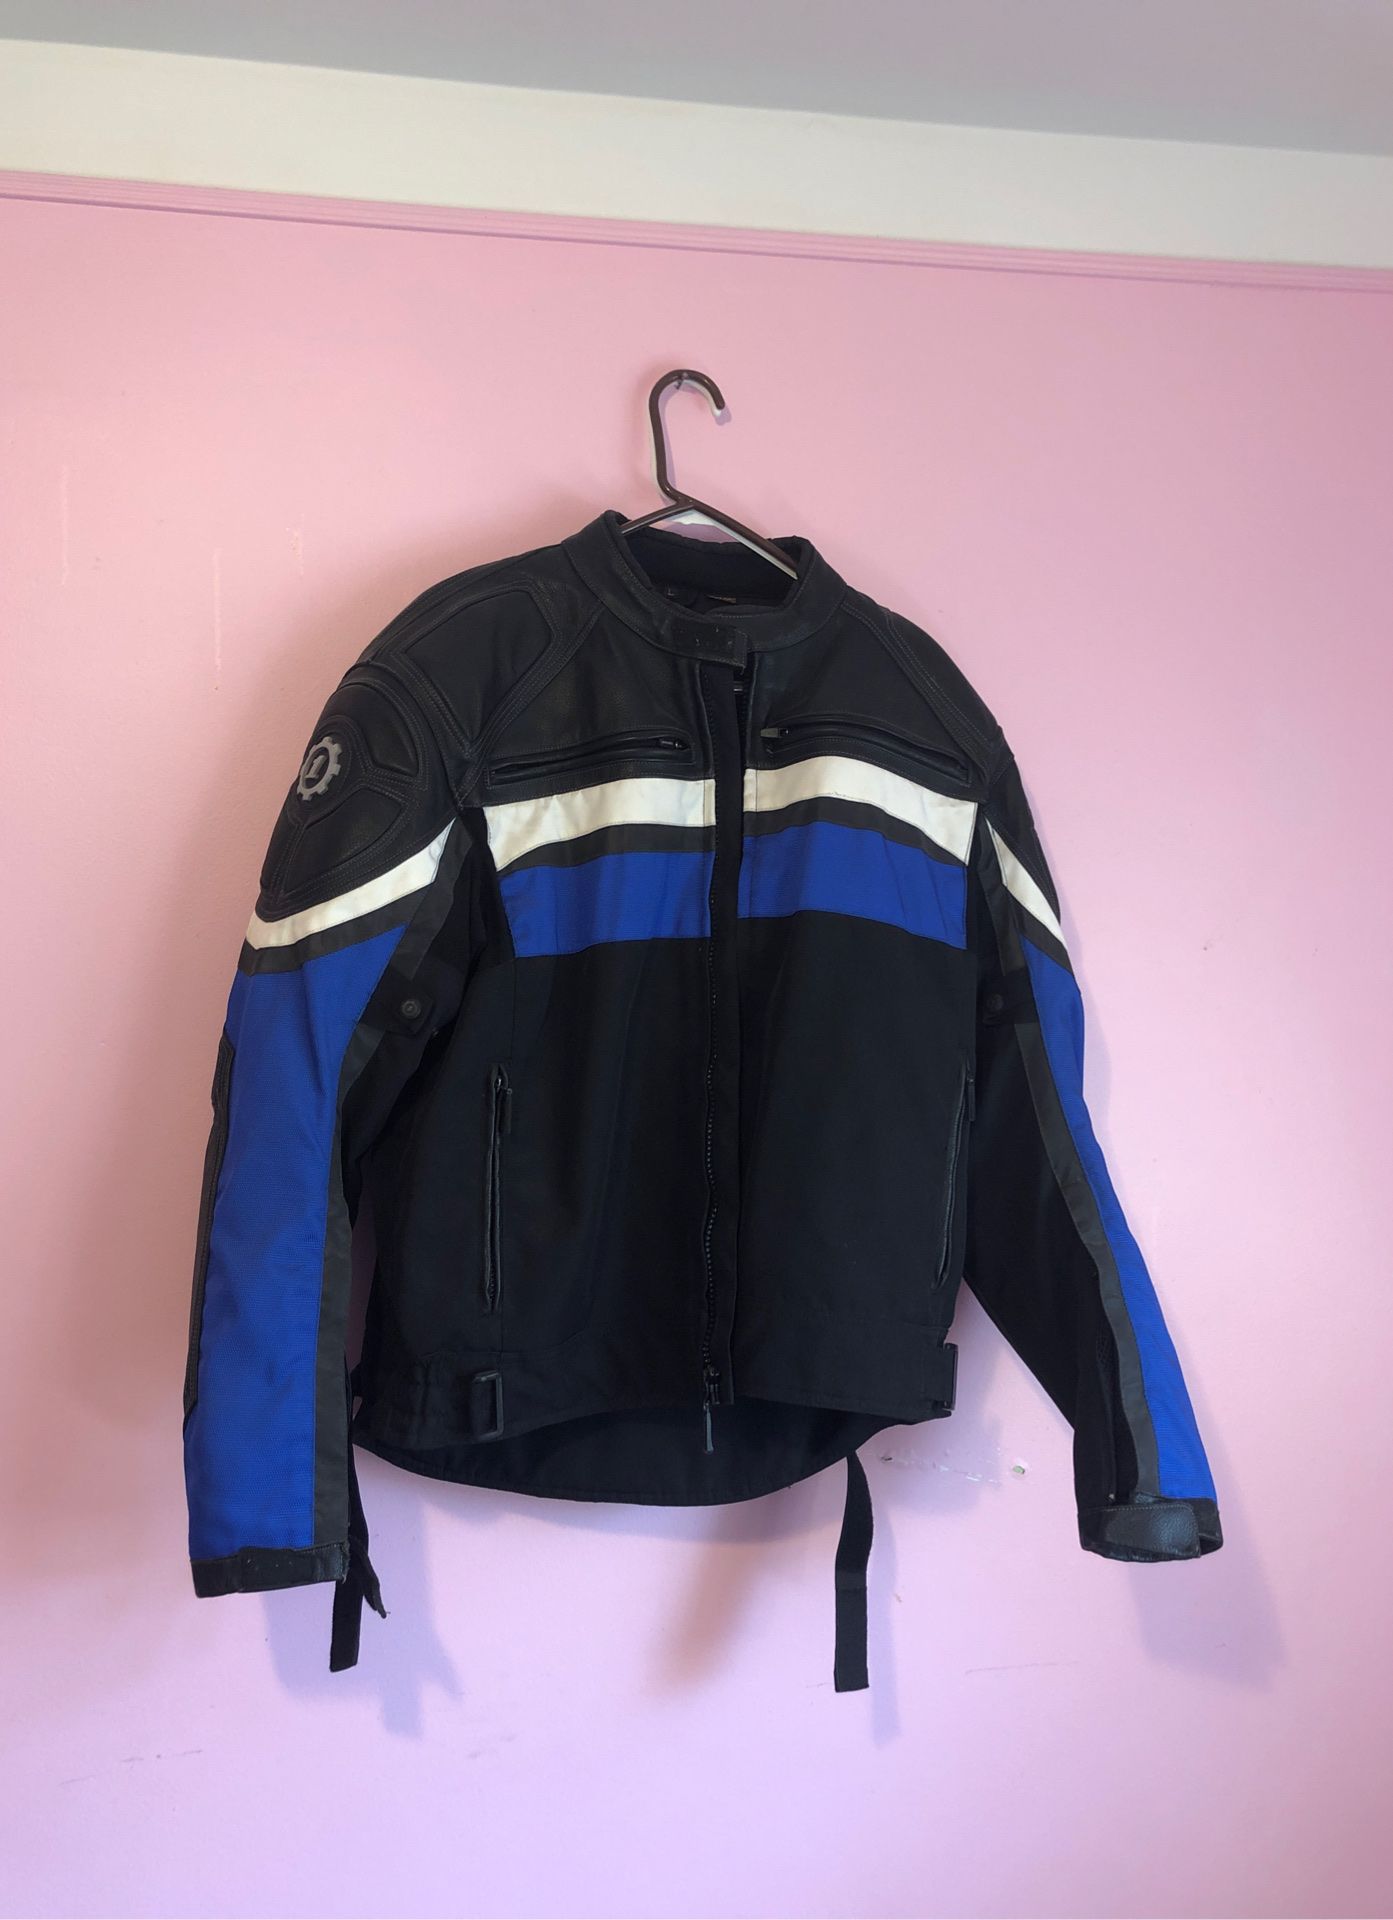 Motorcycle jacket new condition size large